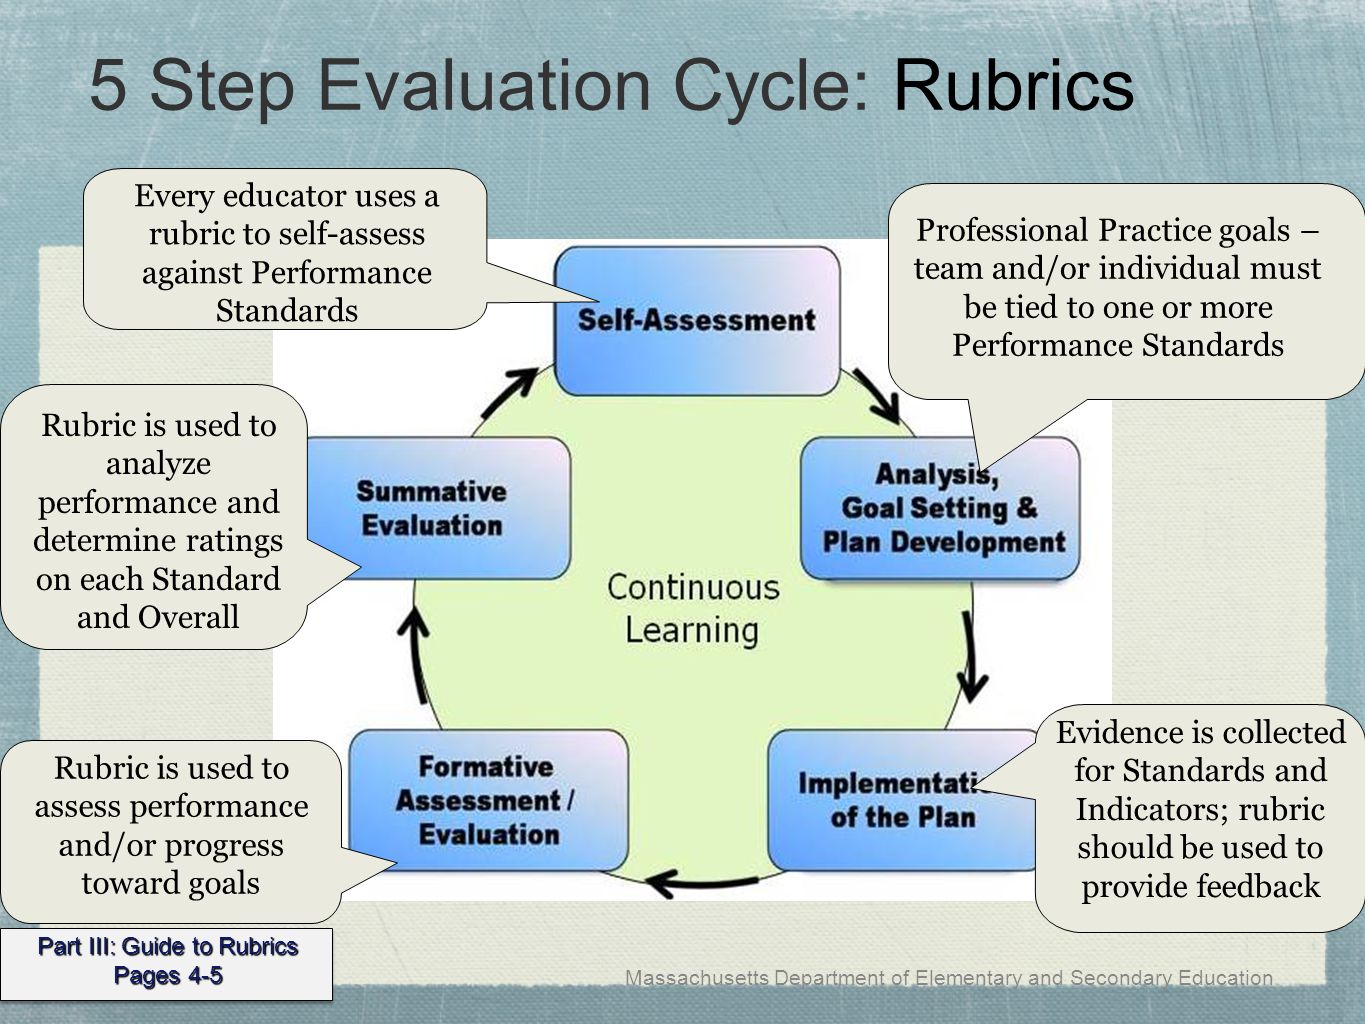 Massachusetts Department of Elementary and Secondary Education 5 Step Evaluation Cycle: Rubrics 10 Part III: Guide to Rubrics Pages 4-5 Rubric is used to assess performance and/or progress toward goals Rubric is used to analyze performance and determine ratings on each Standard and Overall Every educator uses a rubric to self-assess against Performance Standards Professional Practice goals – team and/or individual must be tied to one or more Performance Standards Evidence is collected for Standards and Indicators; rubric should be used to provide feedback